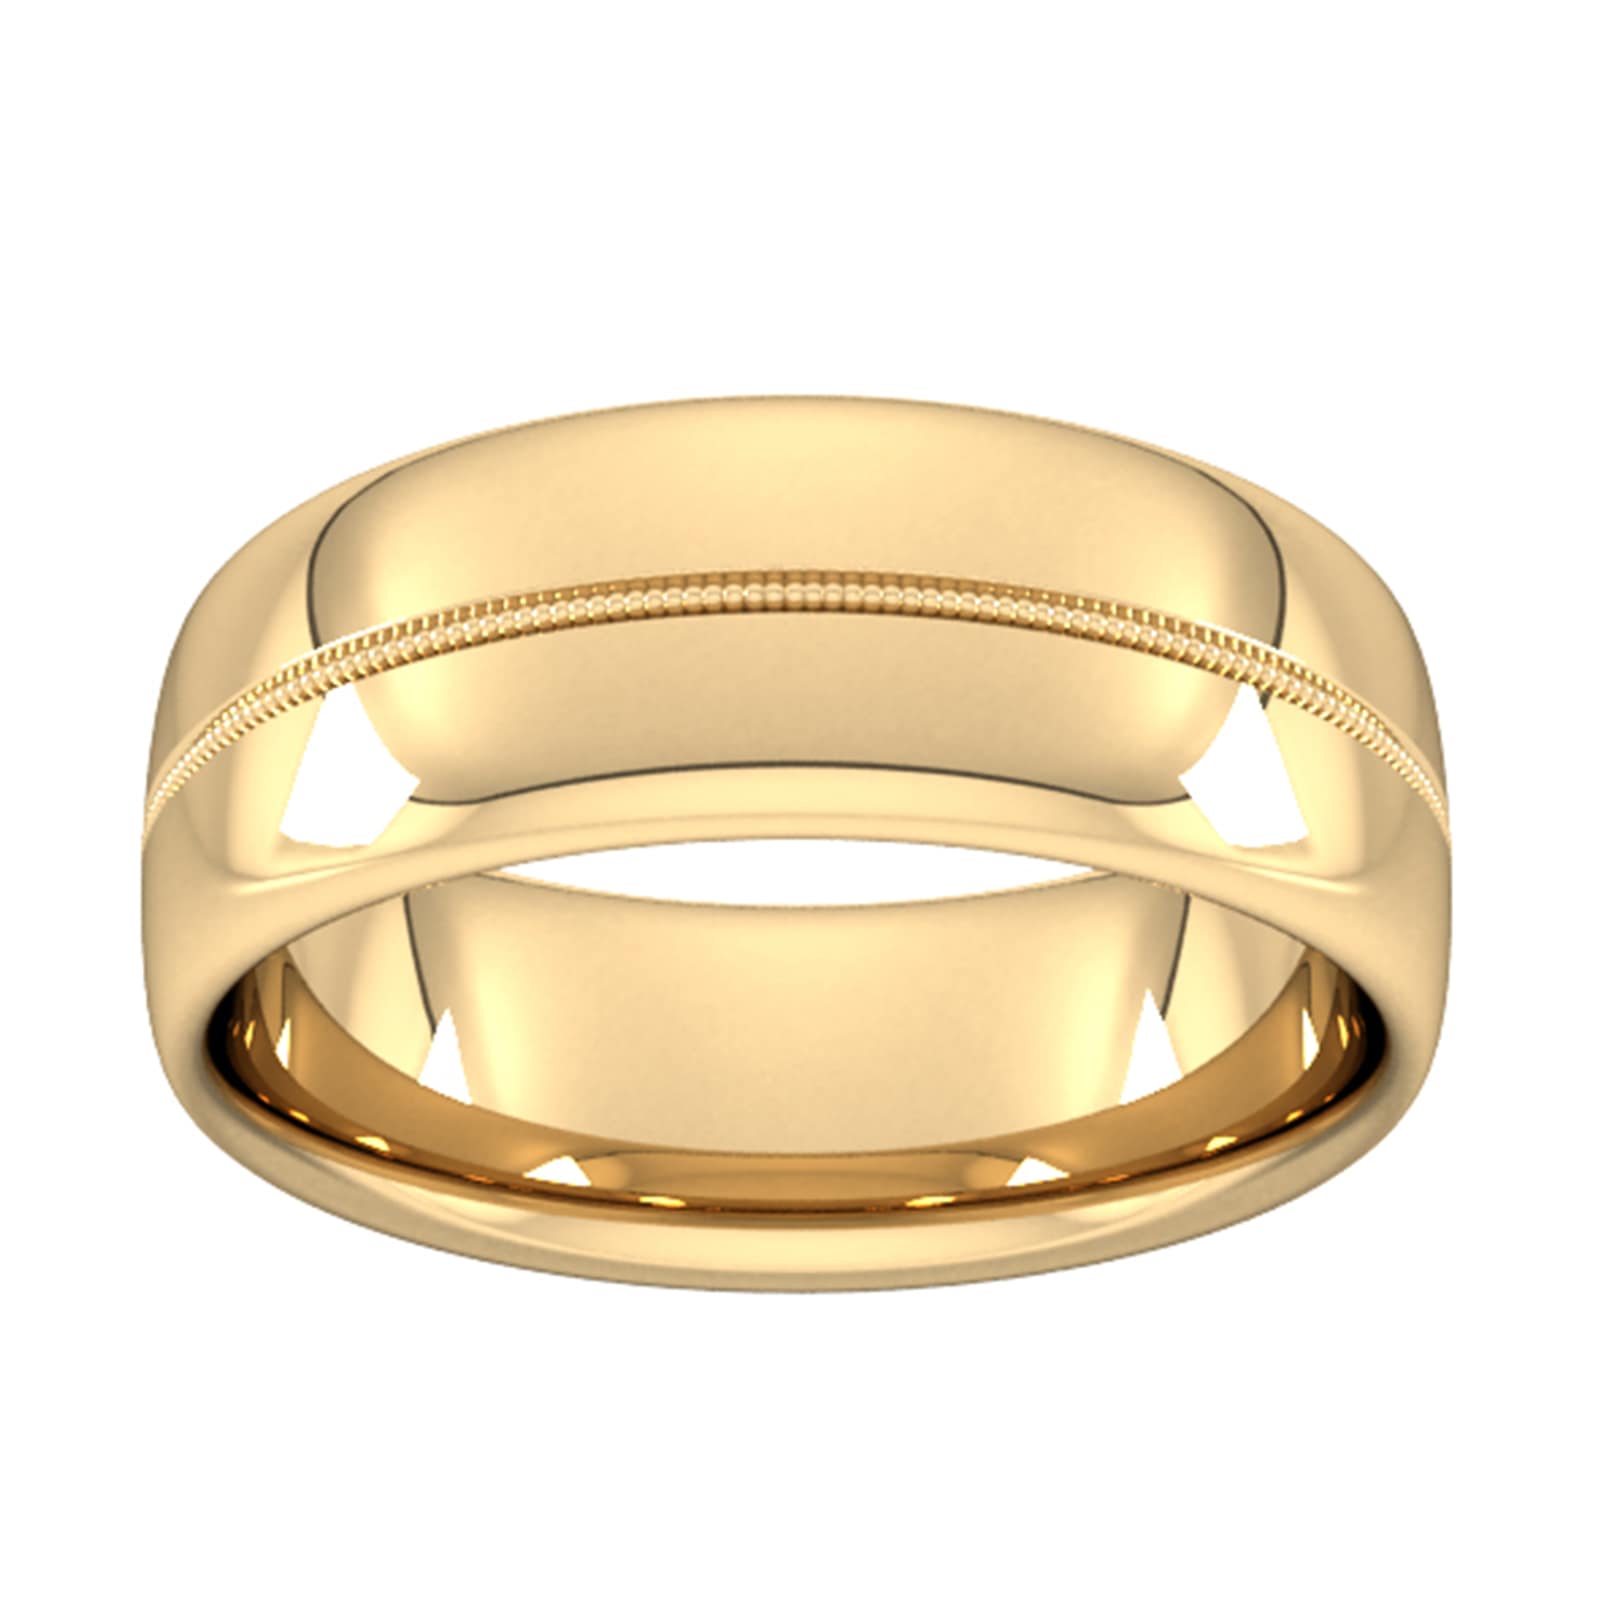 8mm Flat Court Heavy Milgrain Centre Wedding Ring In 18 Carat Yellow Gold - Ring Size L